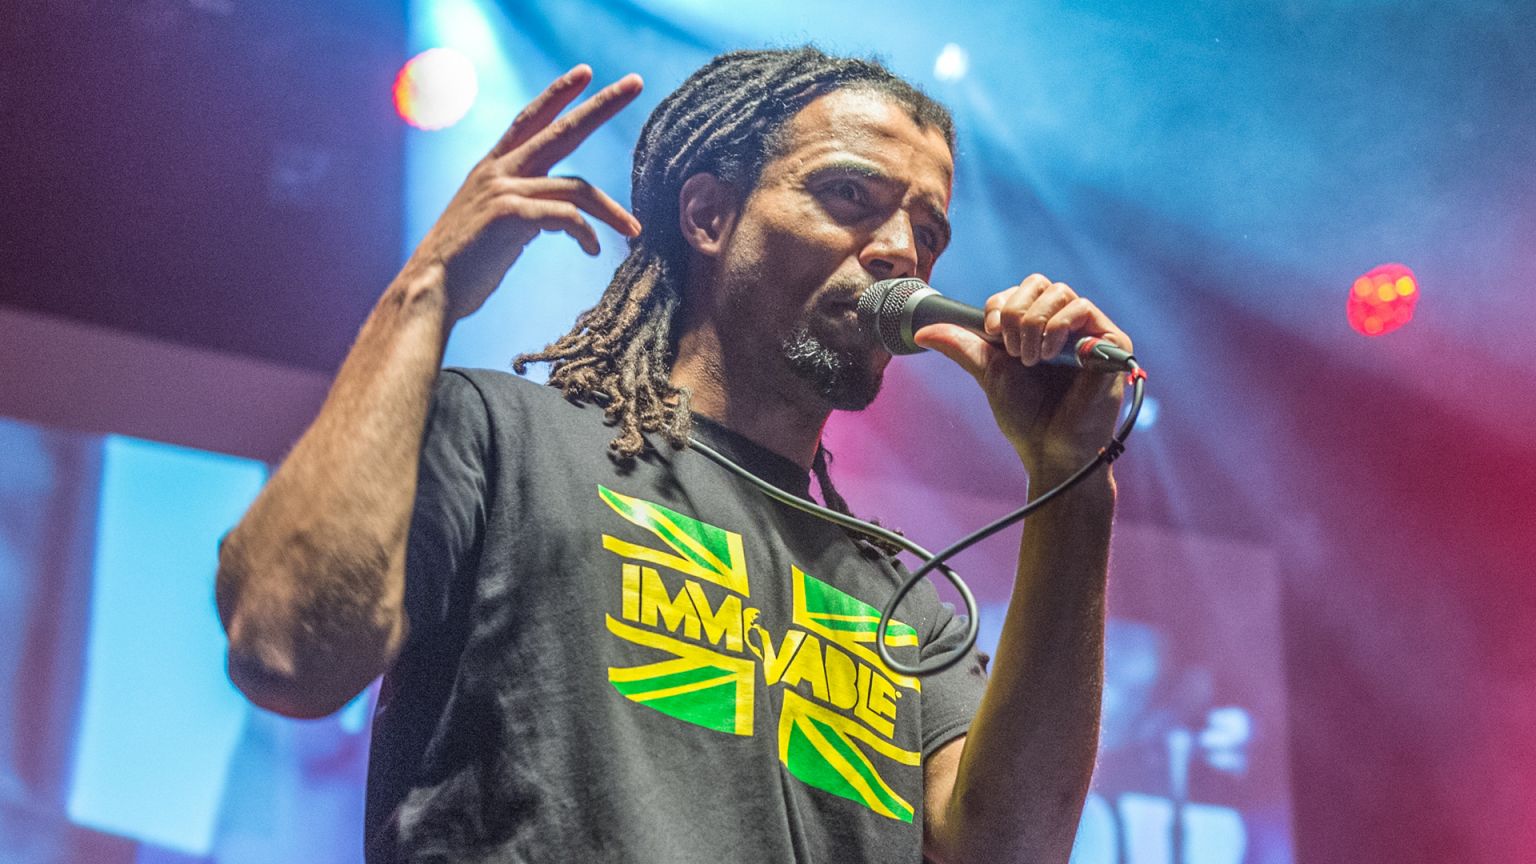 Image shows artist Akala with a microphone in hand, wearing a t-shirt with lights shining behind him